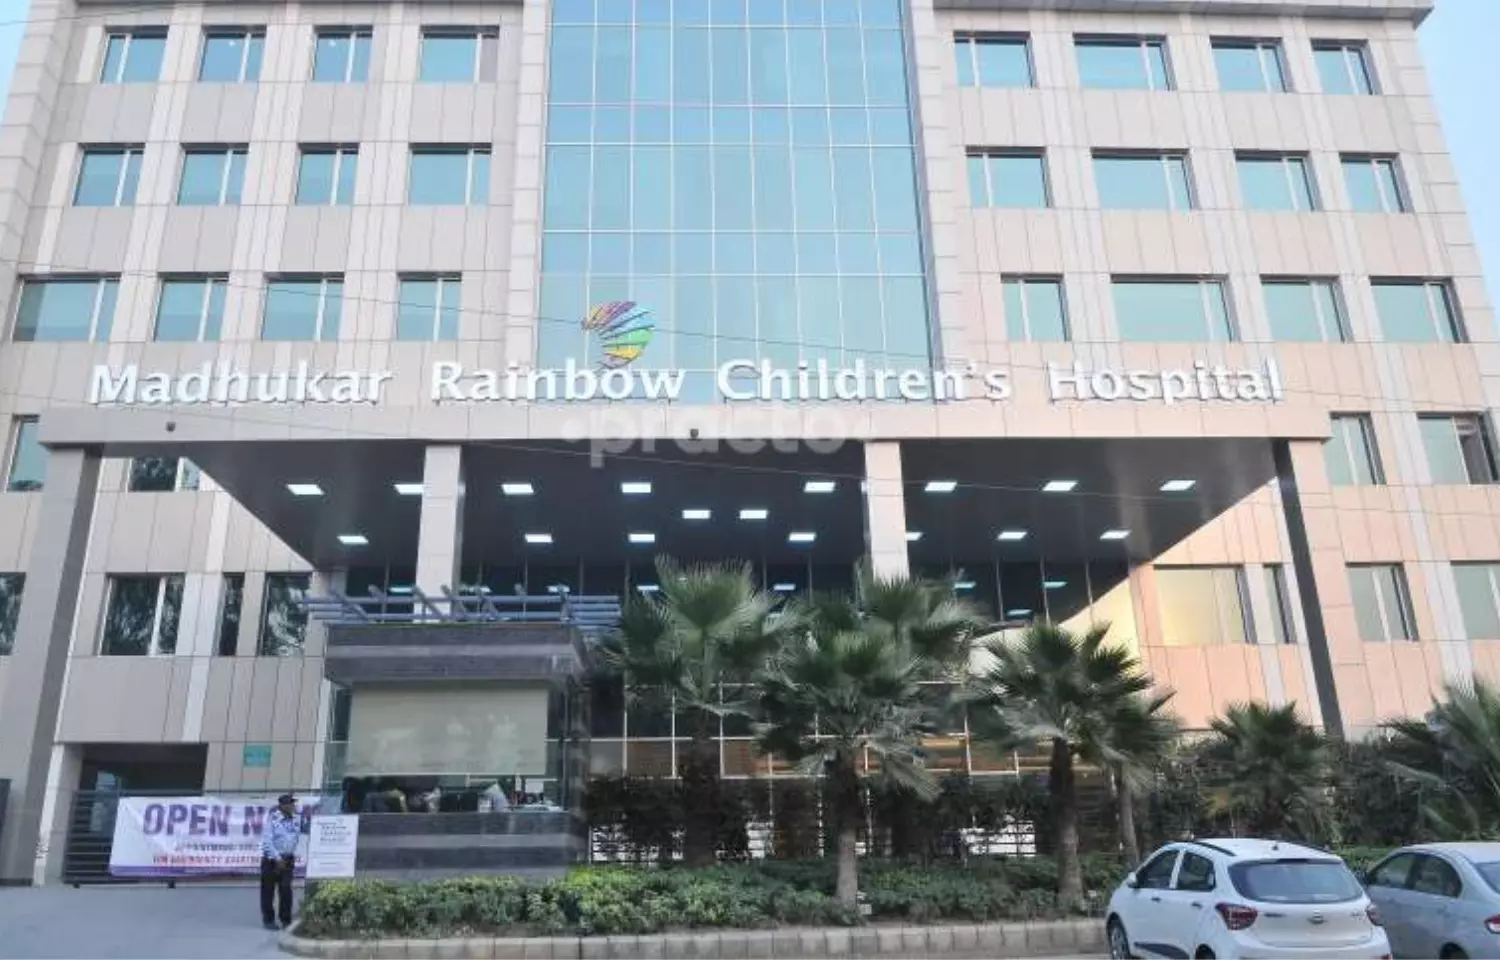 Delhi : Madhukar Rainbow Childrens Hospital asked EWS patient to pay Rs 1 lakh for admission, DCPCR issued notice